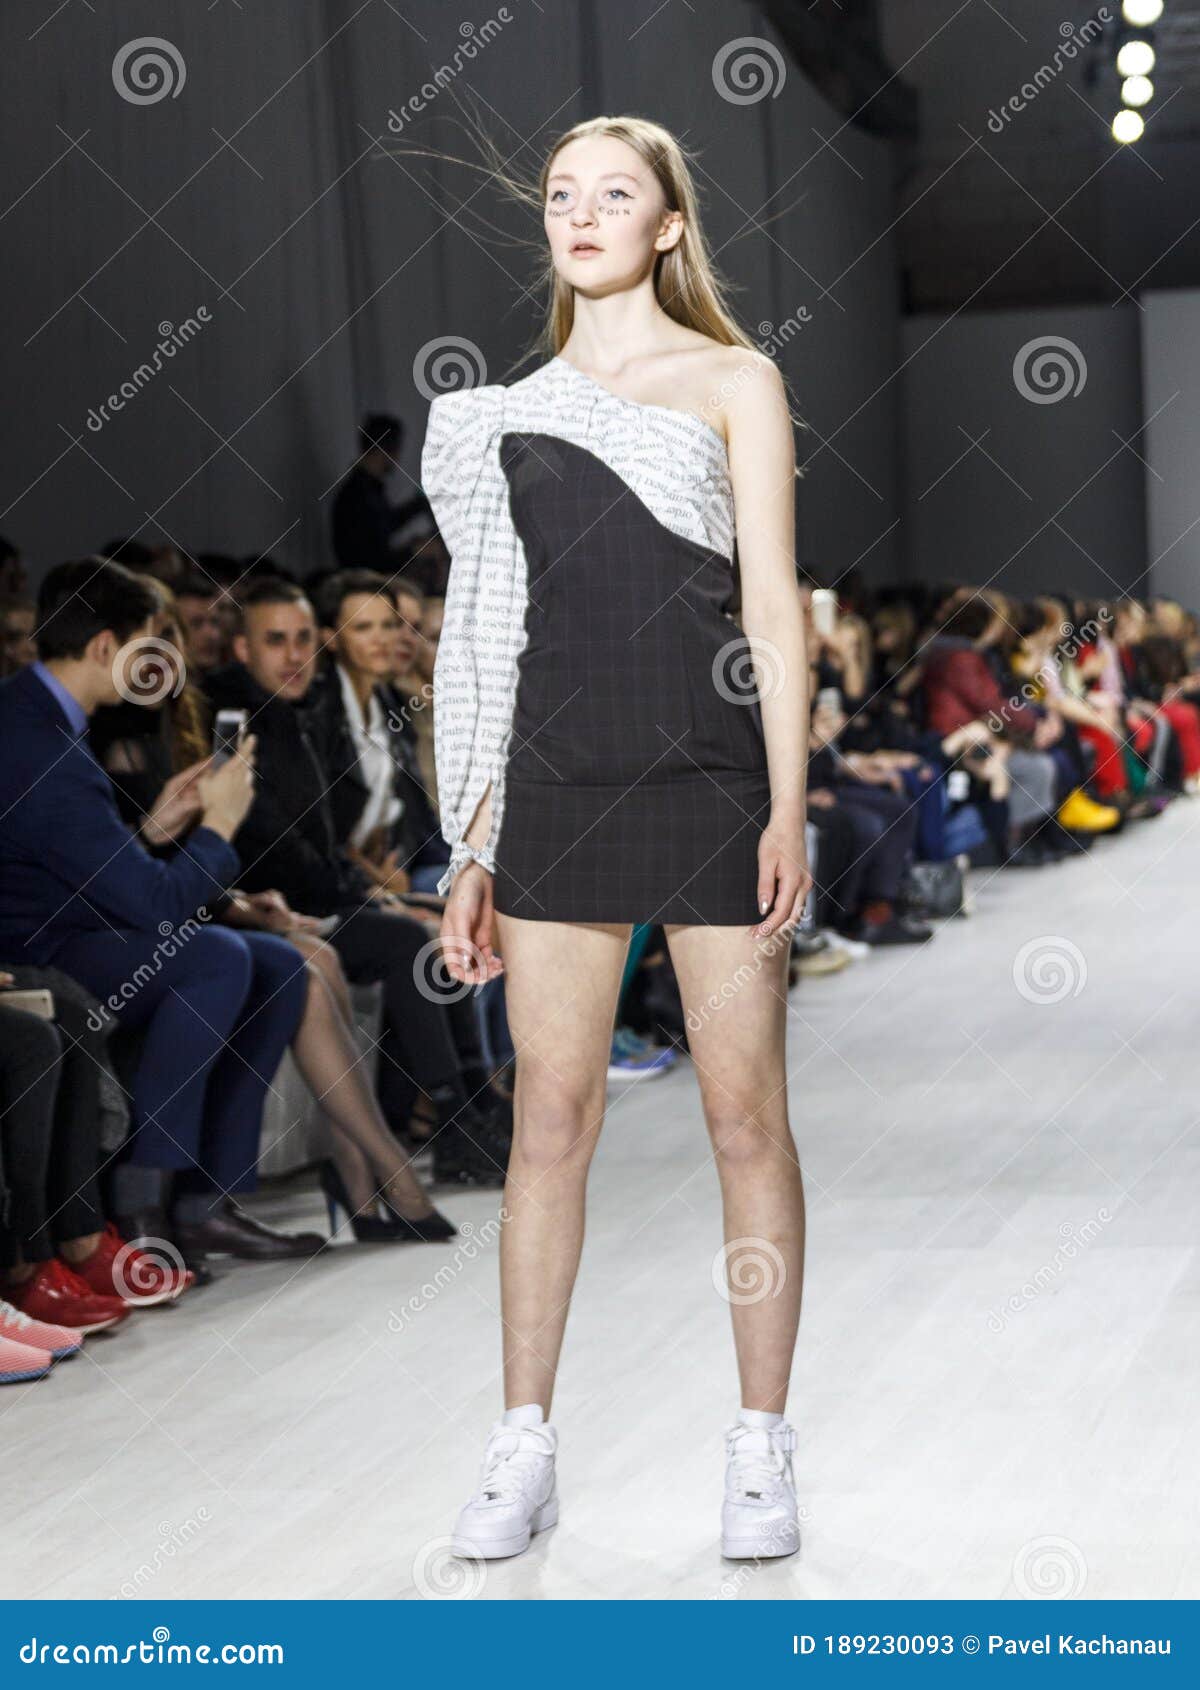 The Model is on the Catwalk at the Fashion Show Editorial Stock Photo ...